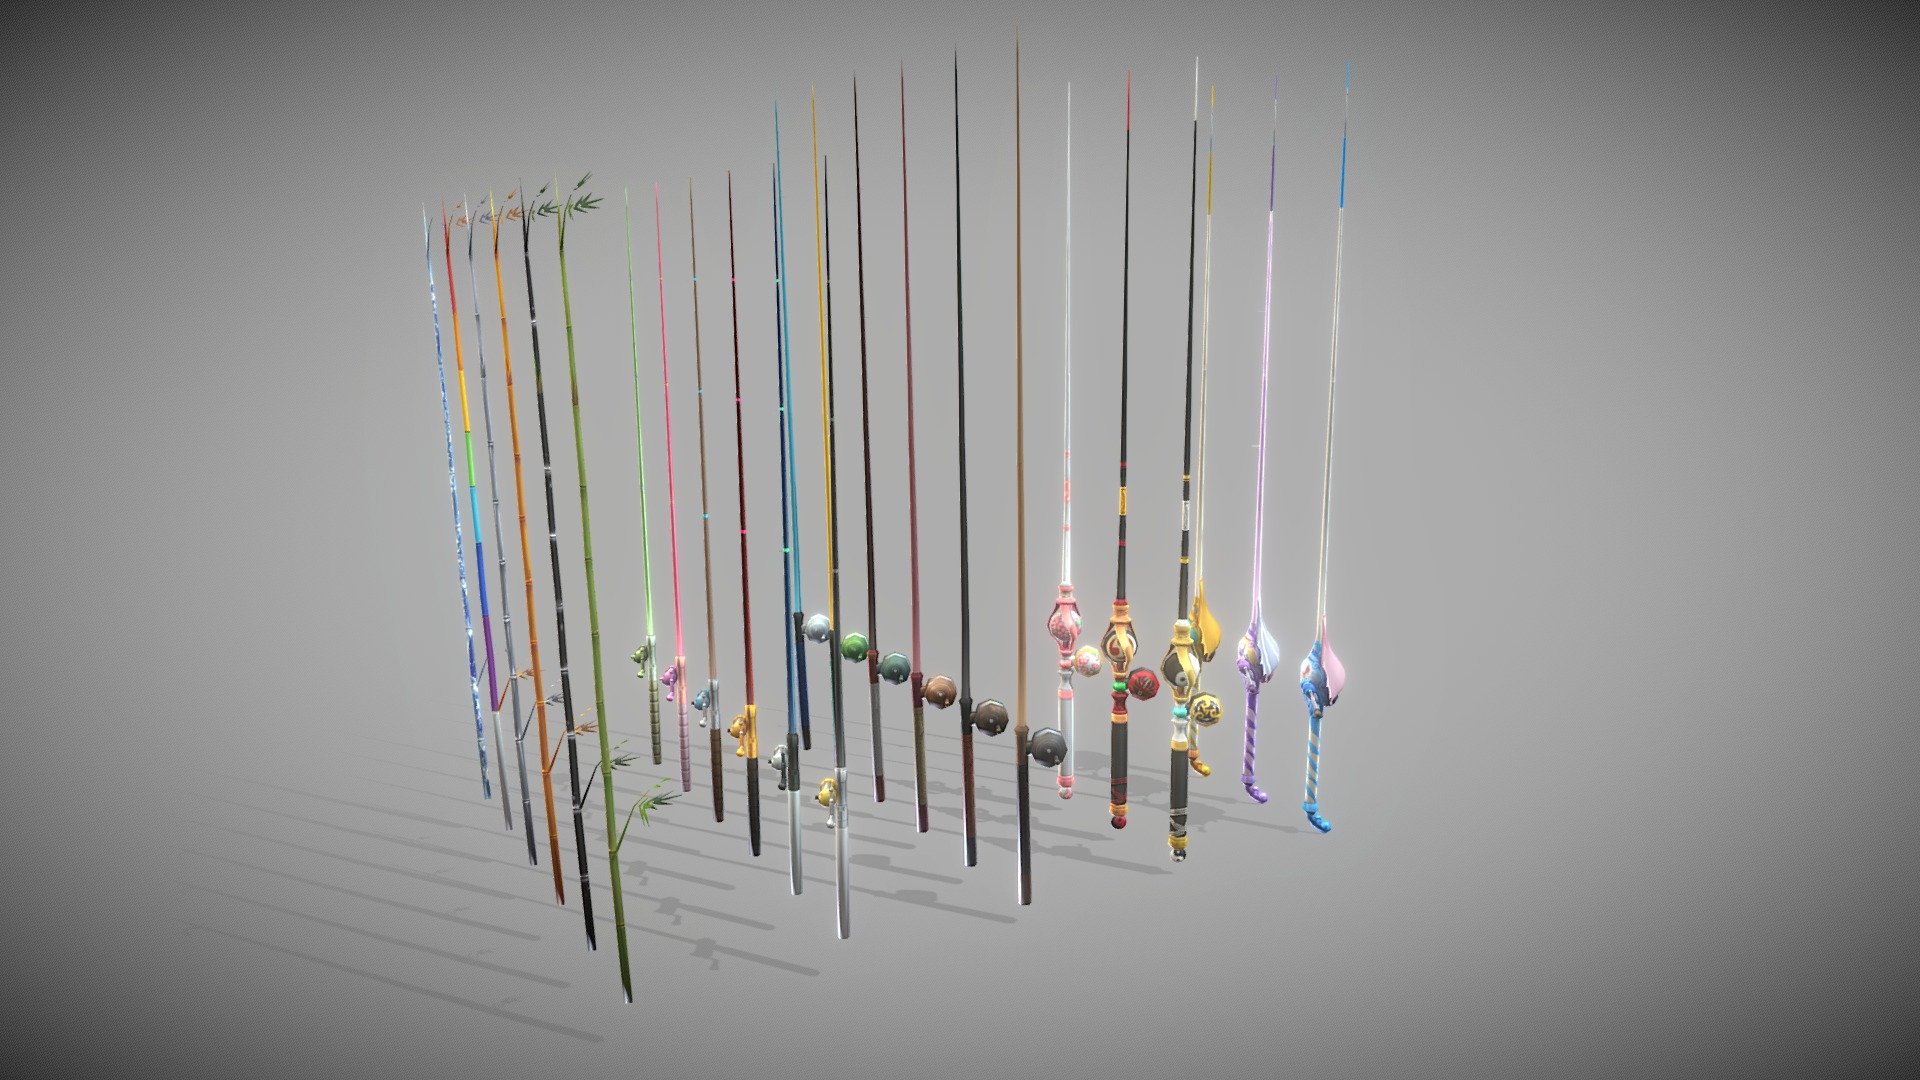 Fishing rods for fantasy and RPG games. Rigged. 24 skins. 5 models, from the simplest to the most advanced.




First model: 135 polygons, 145 vertices. 6 skins. Albedo texture 2048x2048.

Next model: 546 polygons, 538 vertices. 6 skins. Albedo texture 2048x2048.

Third model: 294 polygons, 280 vertices. 6 skins. Albedo texture 2048x2048.

Fourth model: 898 polygons, 717 vertices. 3 skins. Albedo texture 2048x2048. 

Fifth model: 966 polygons, 836 vertices. 3 skins. Albedo texture 2048x2048.
 - Fishing Rods - 3D model by Kajol Hayer (@KajolHayer) 3d model